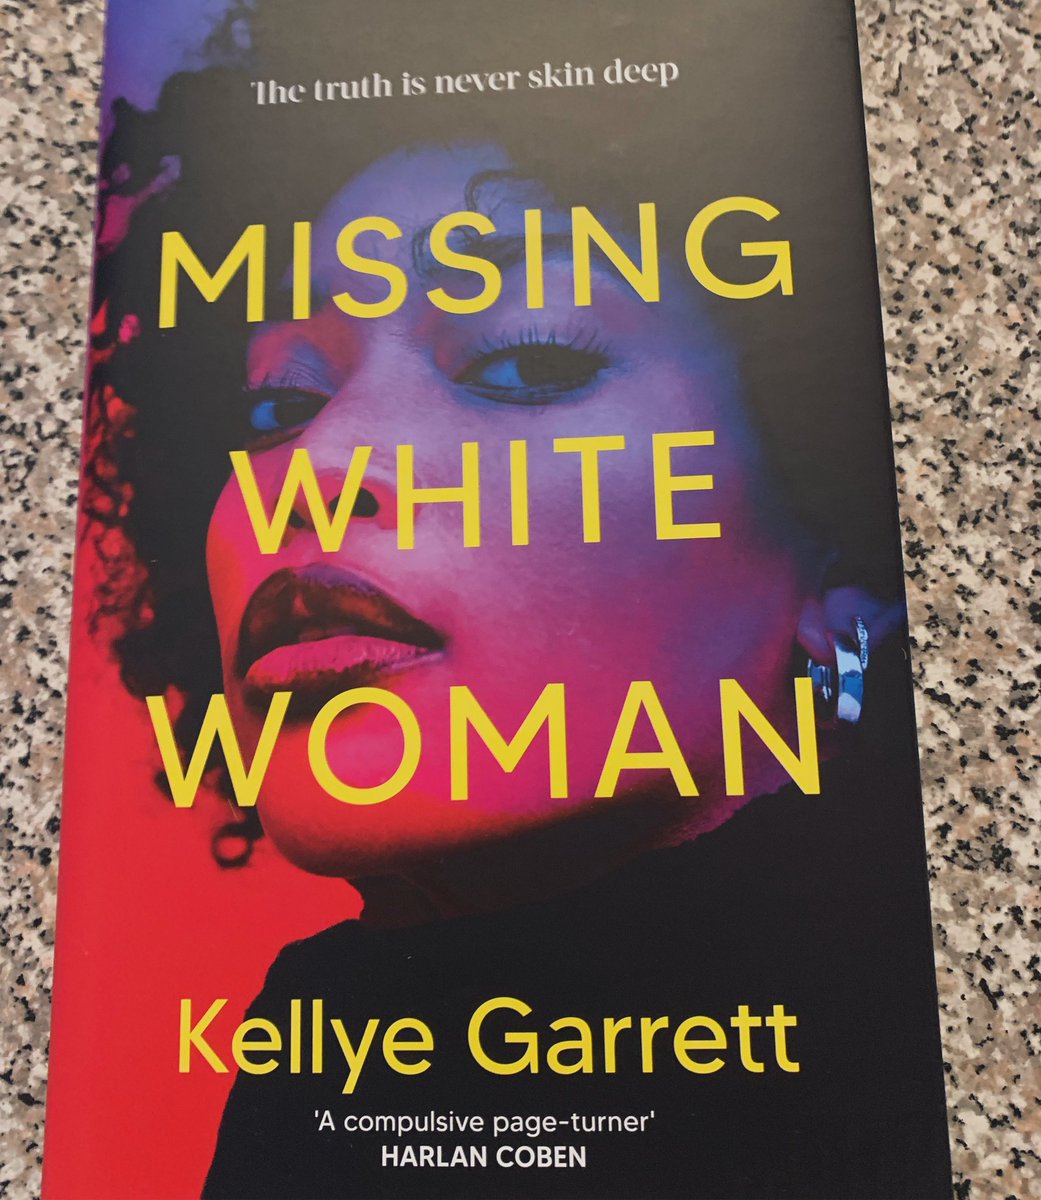 #bookpost from @simonschusterUK today. Looking forward to getting stuck in! #MissingWhiteWoman